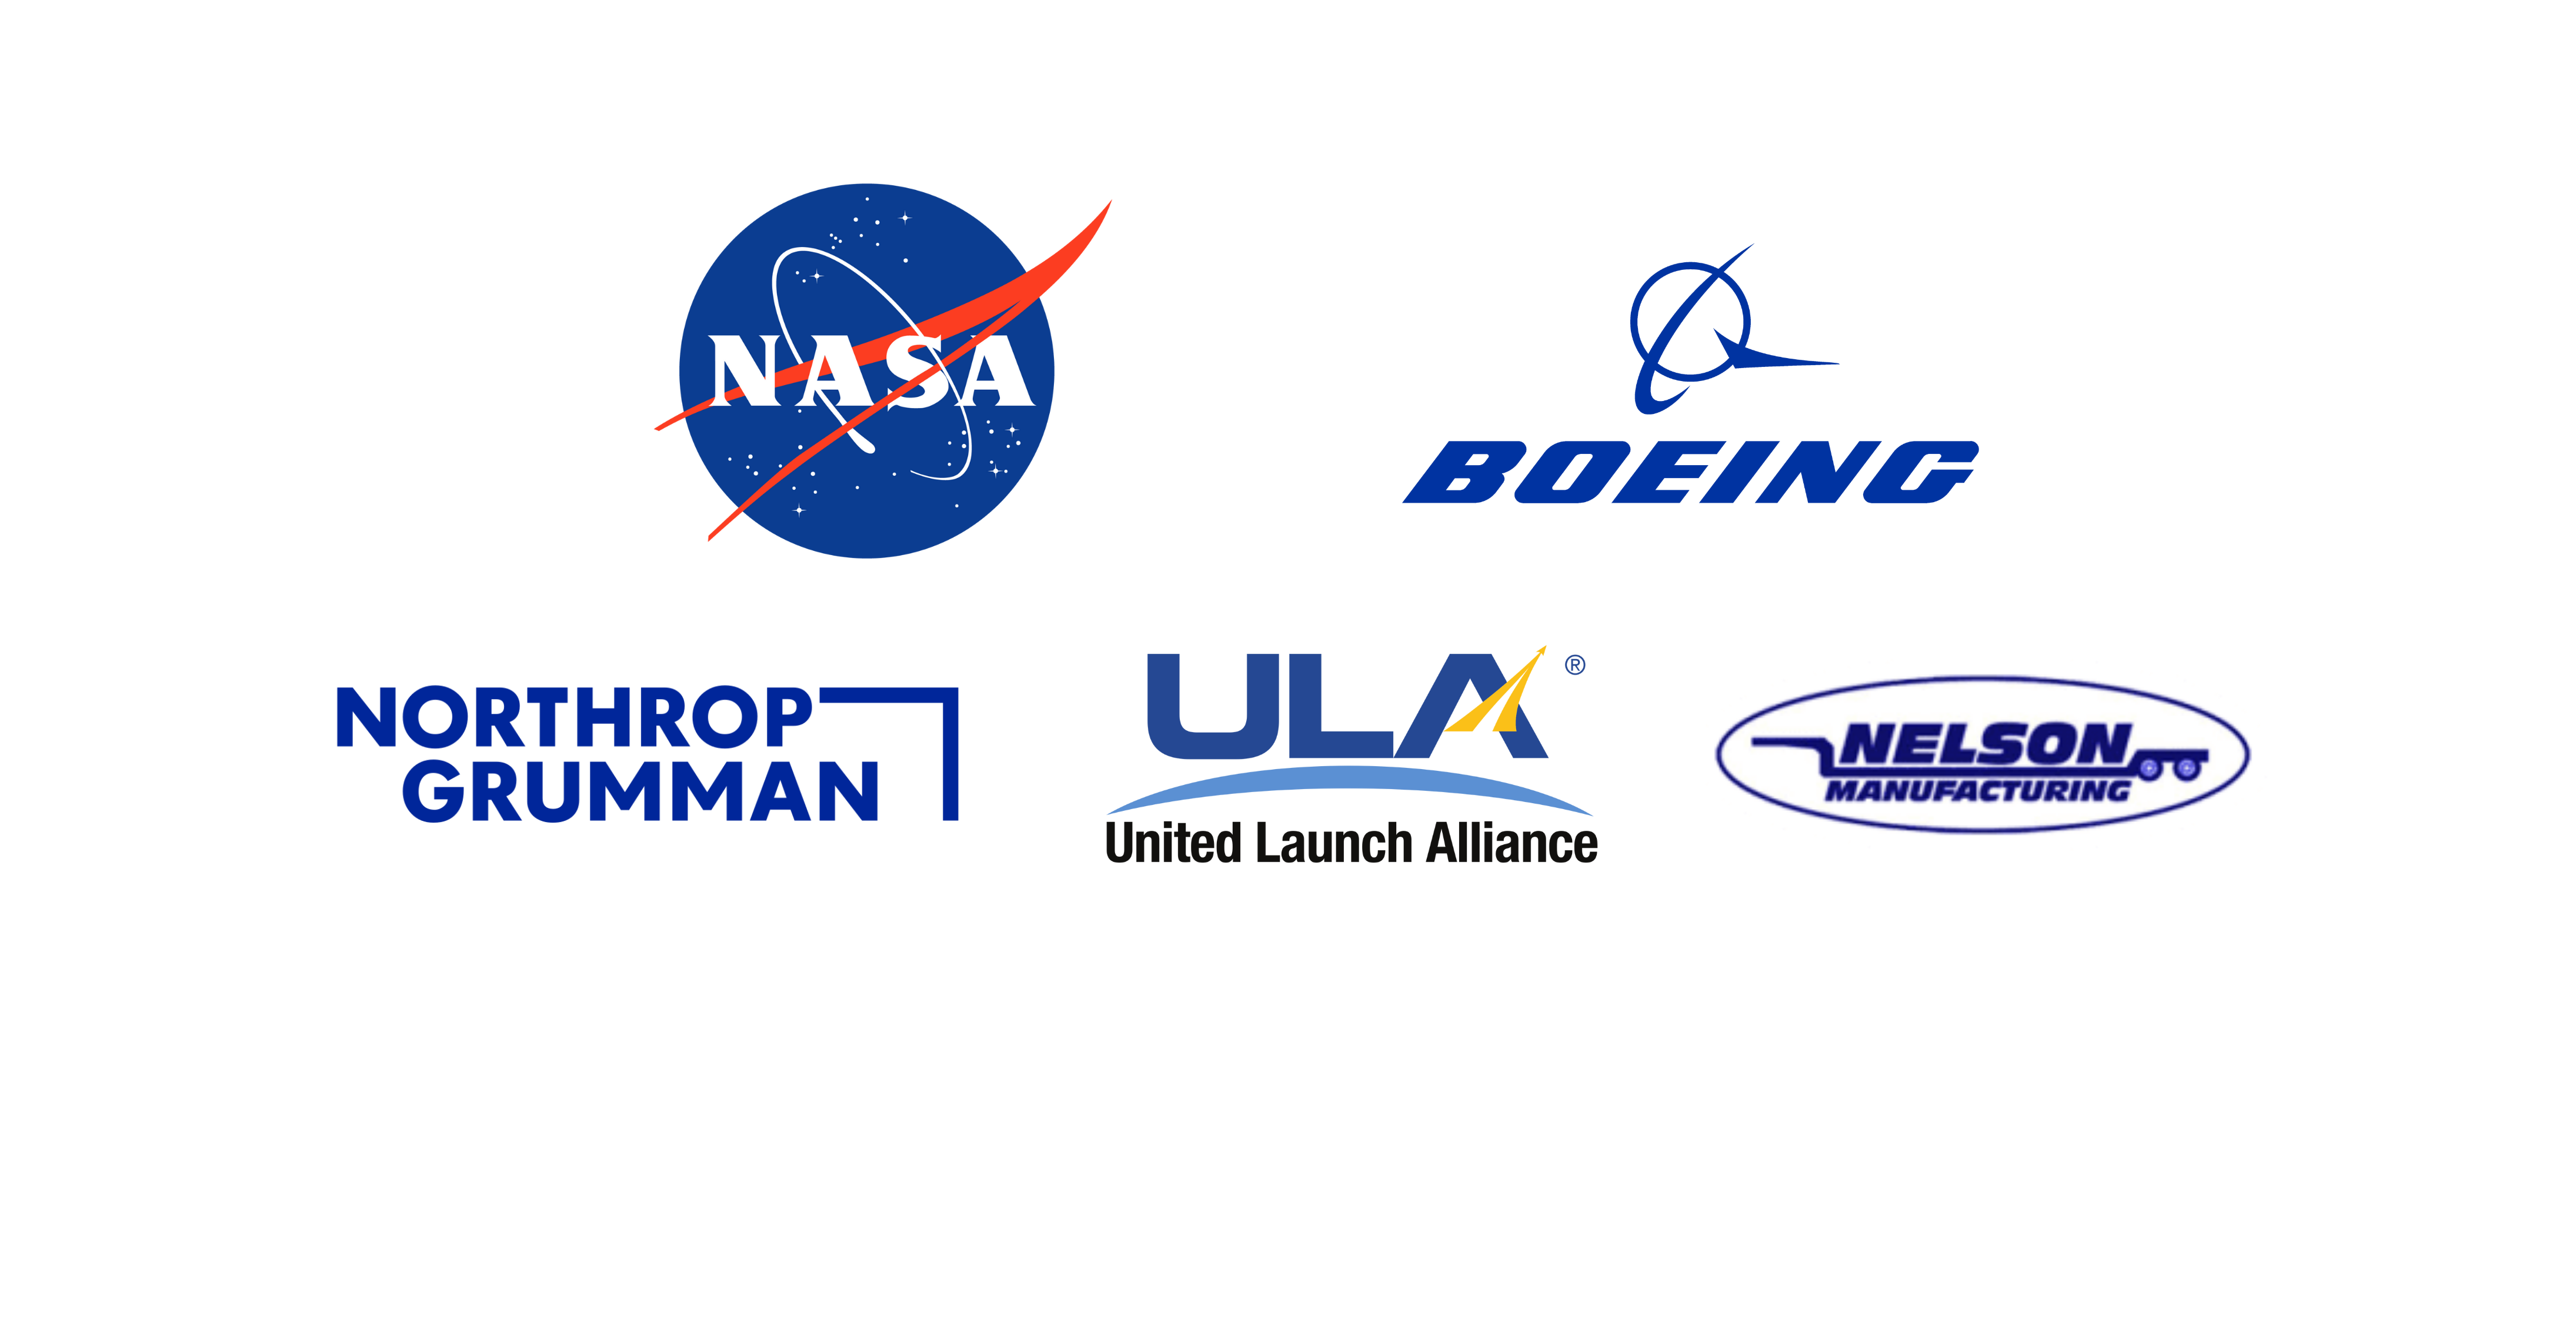 Logos of notable customers including NASA, Boeing, Northrop Grumman, United Launch Alliance, and Nelson Manufacturing